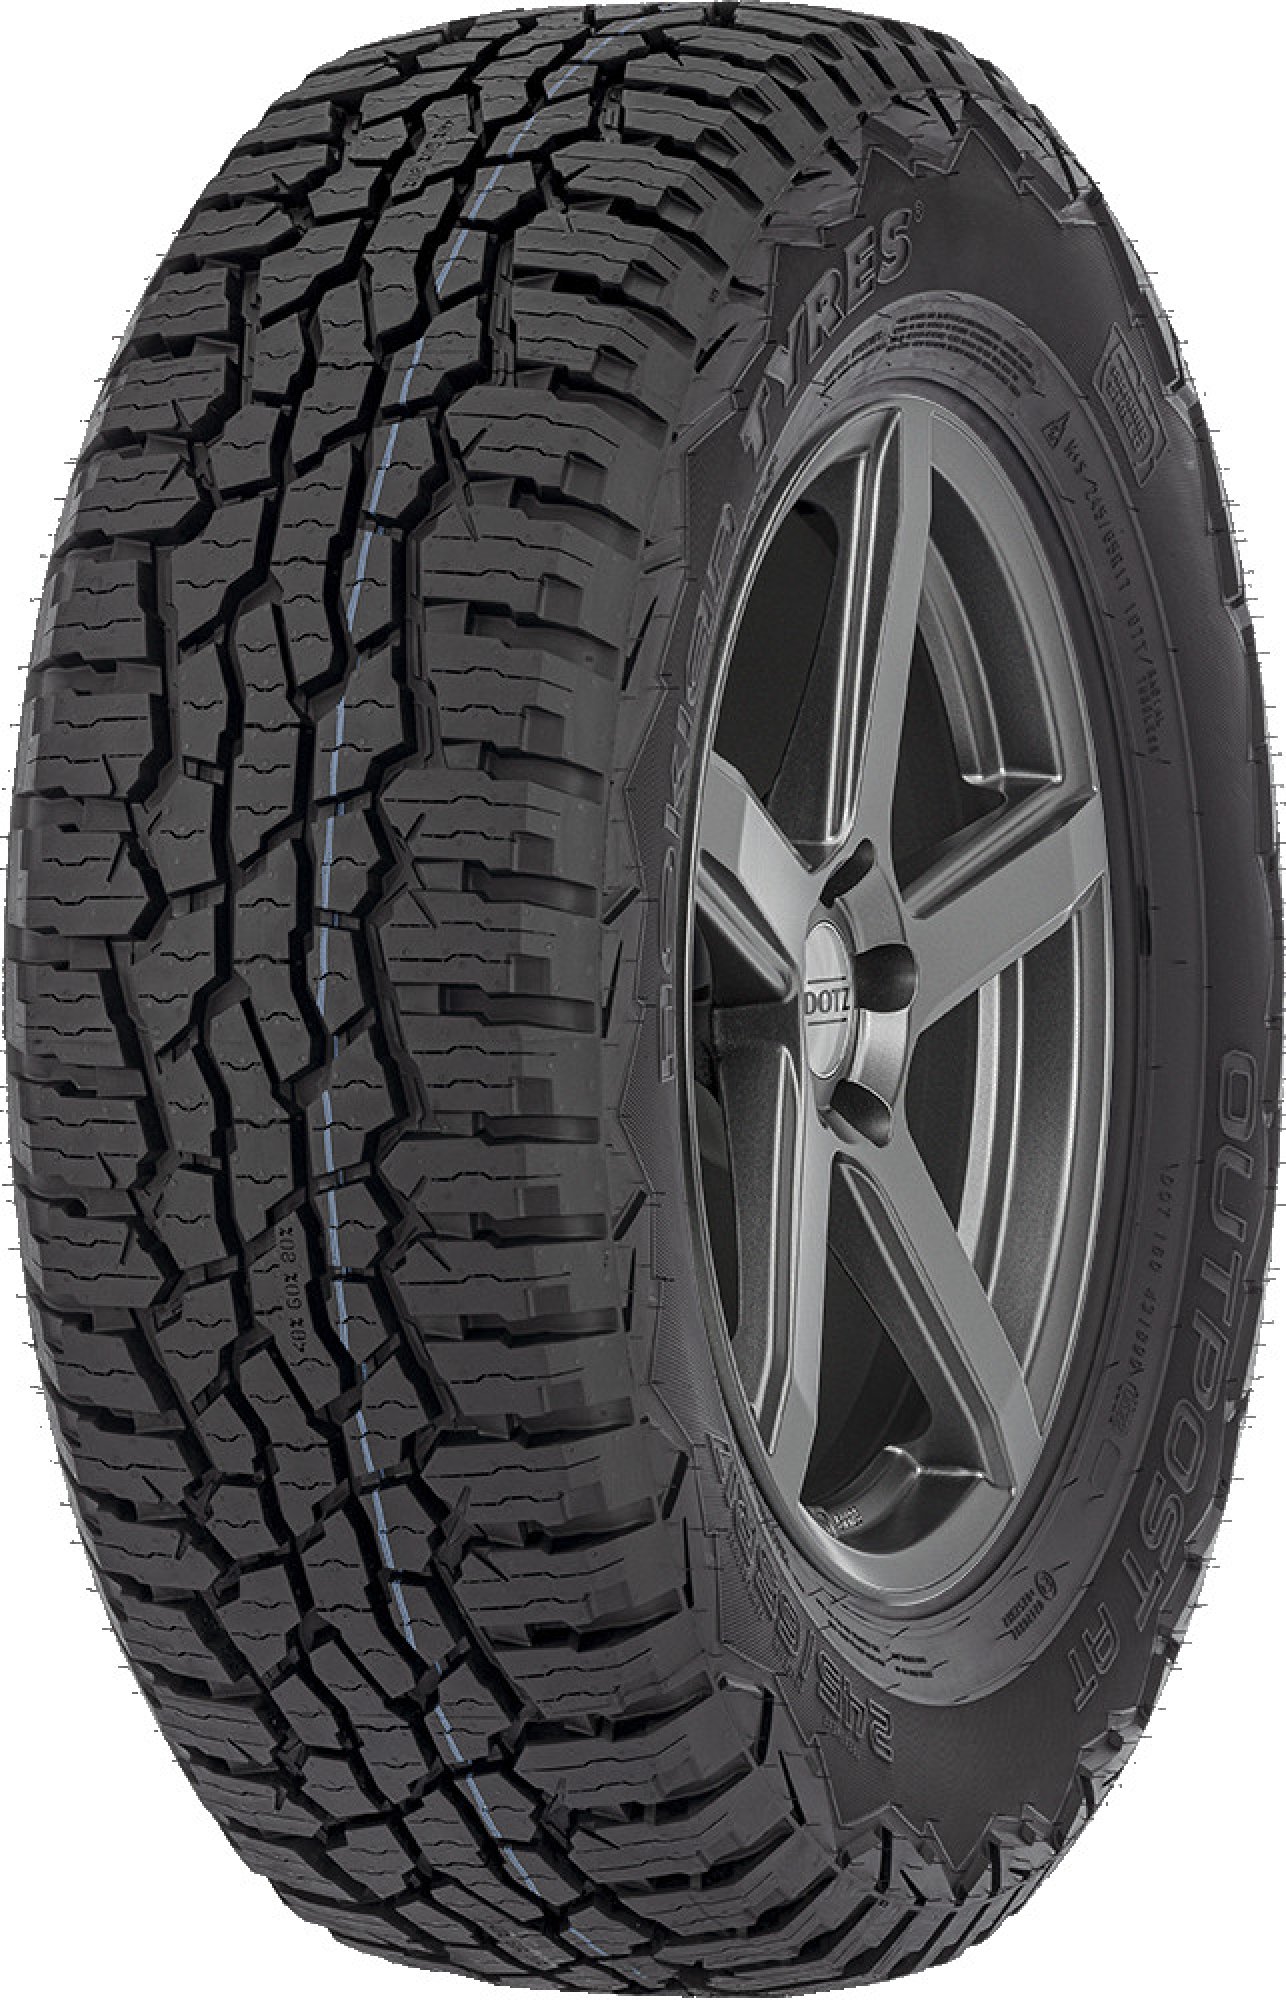 NOKIAN TYRES OUTPOST AT 265/70 R 17 115T